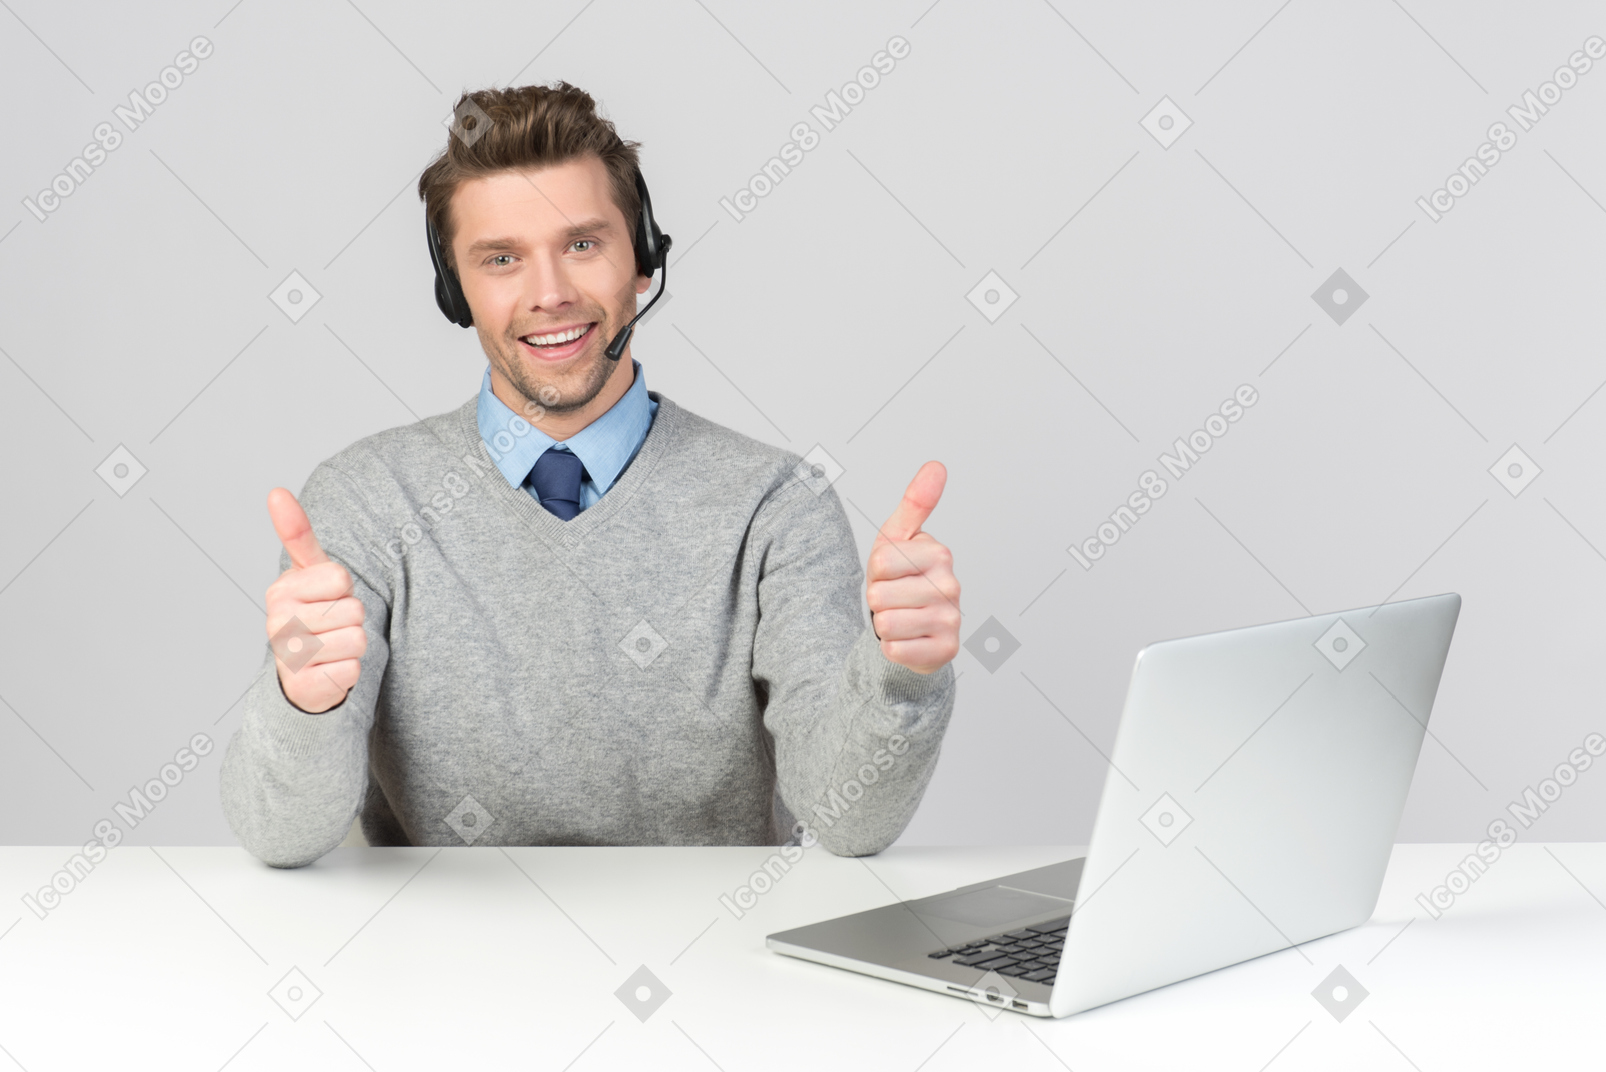 Call center agent sitting at work place and showing thumbs up